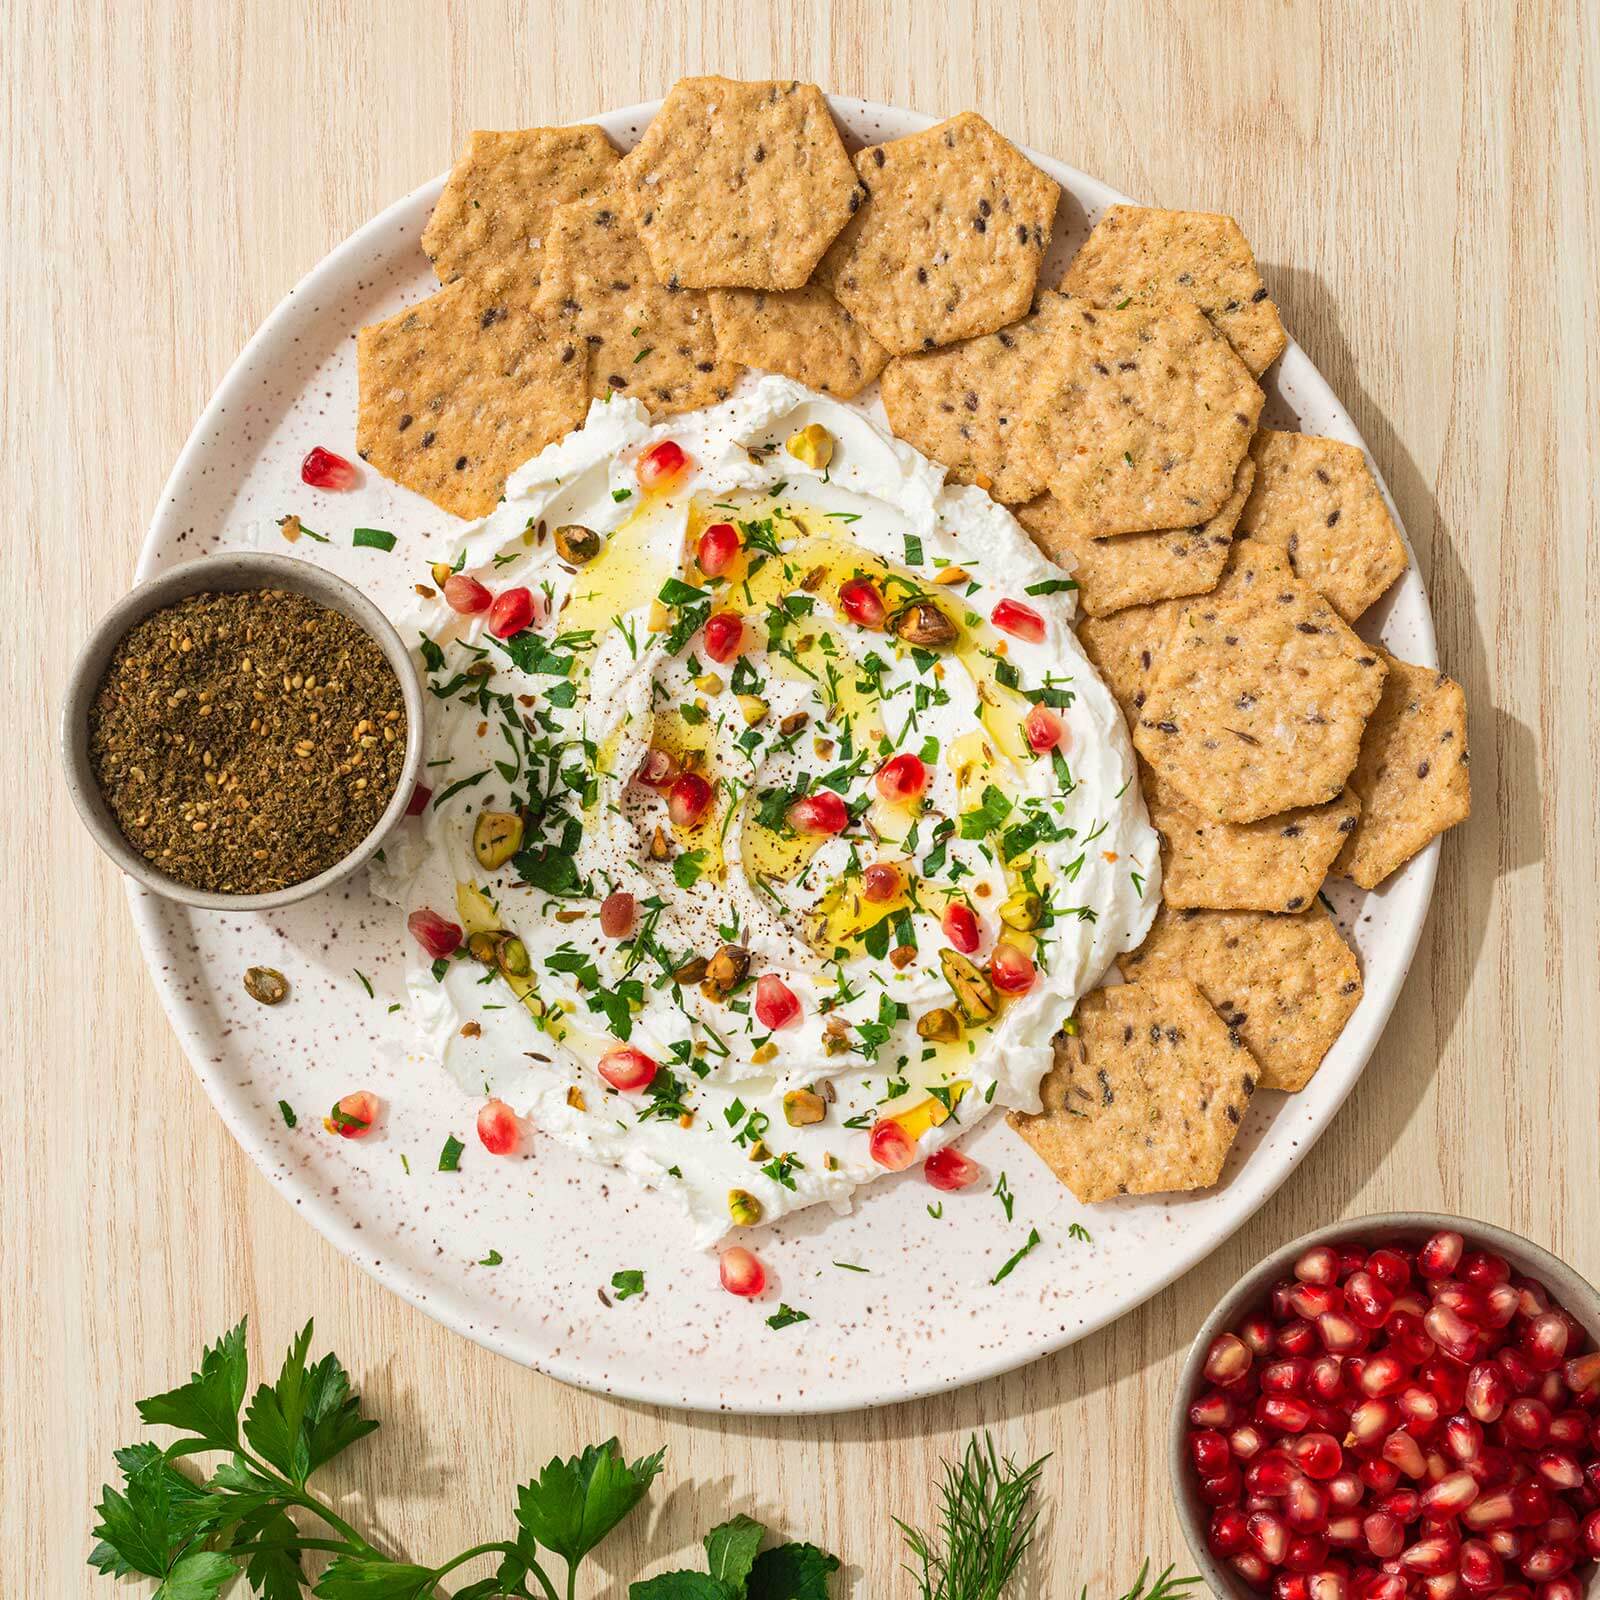 Herbed Pistachio Labneh with Pomegranate